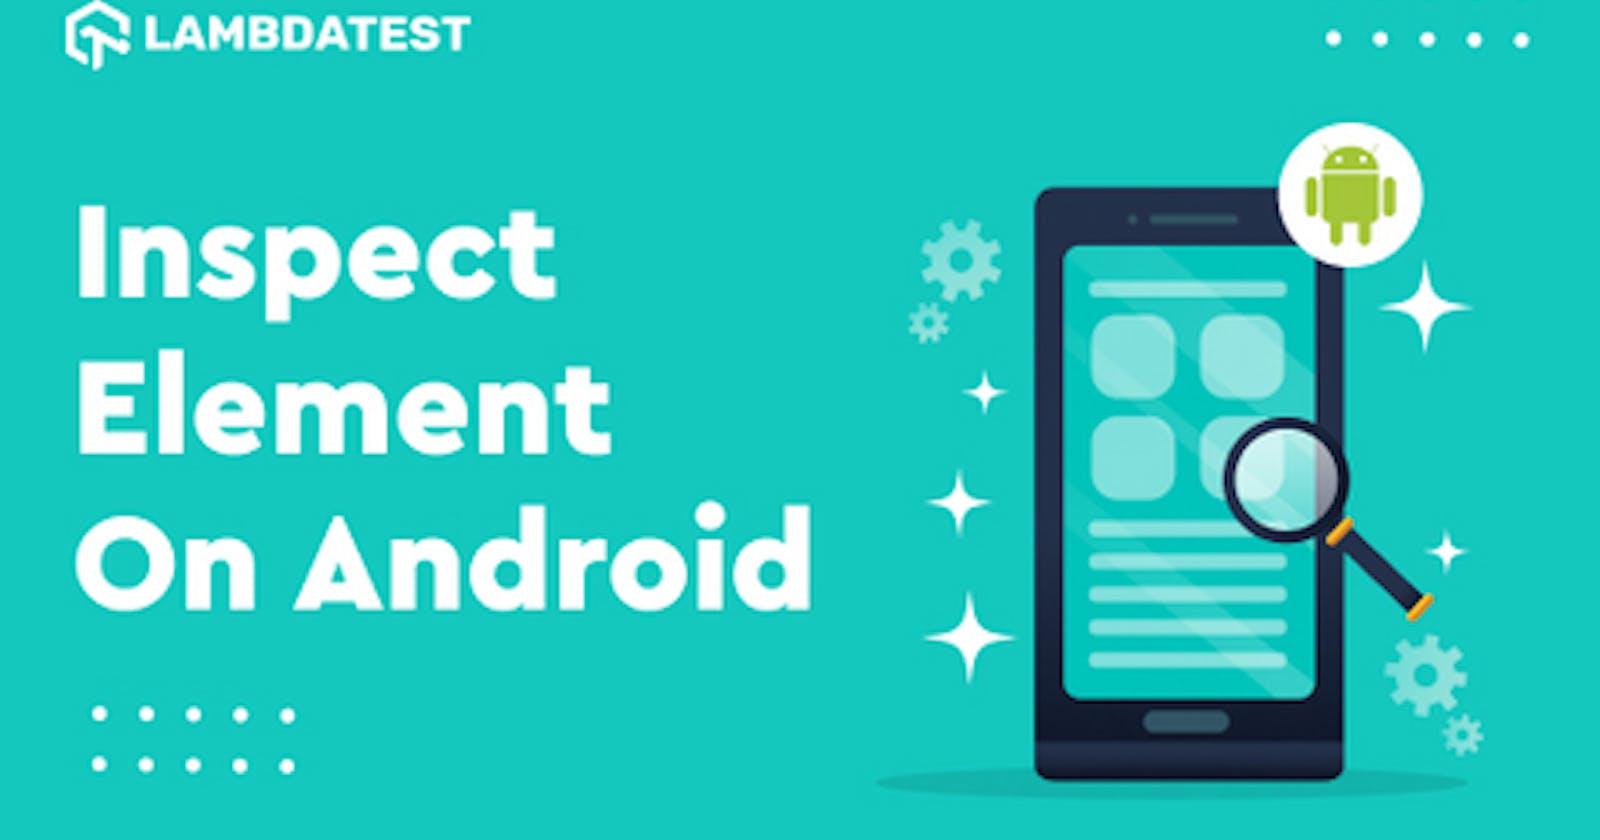 How To Inspect Elements On Android Devices?